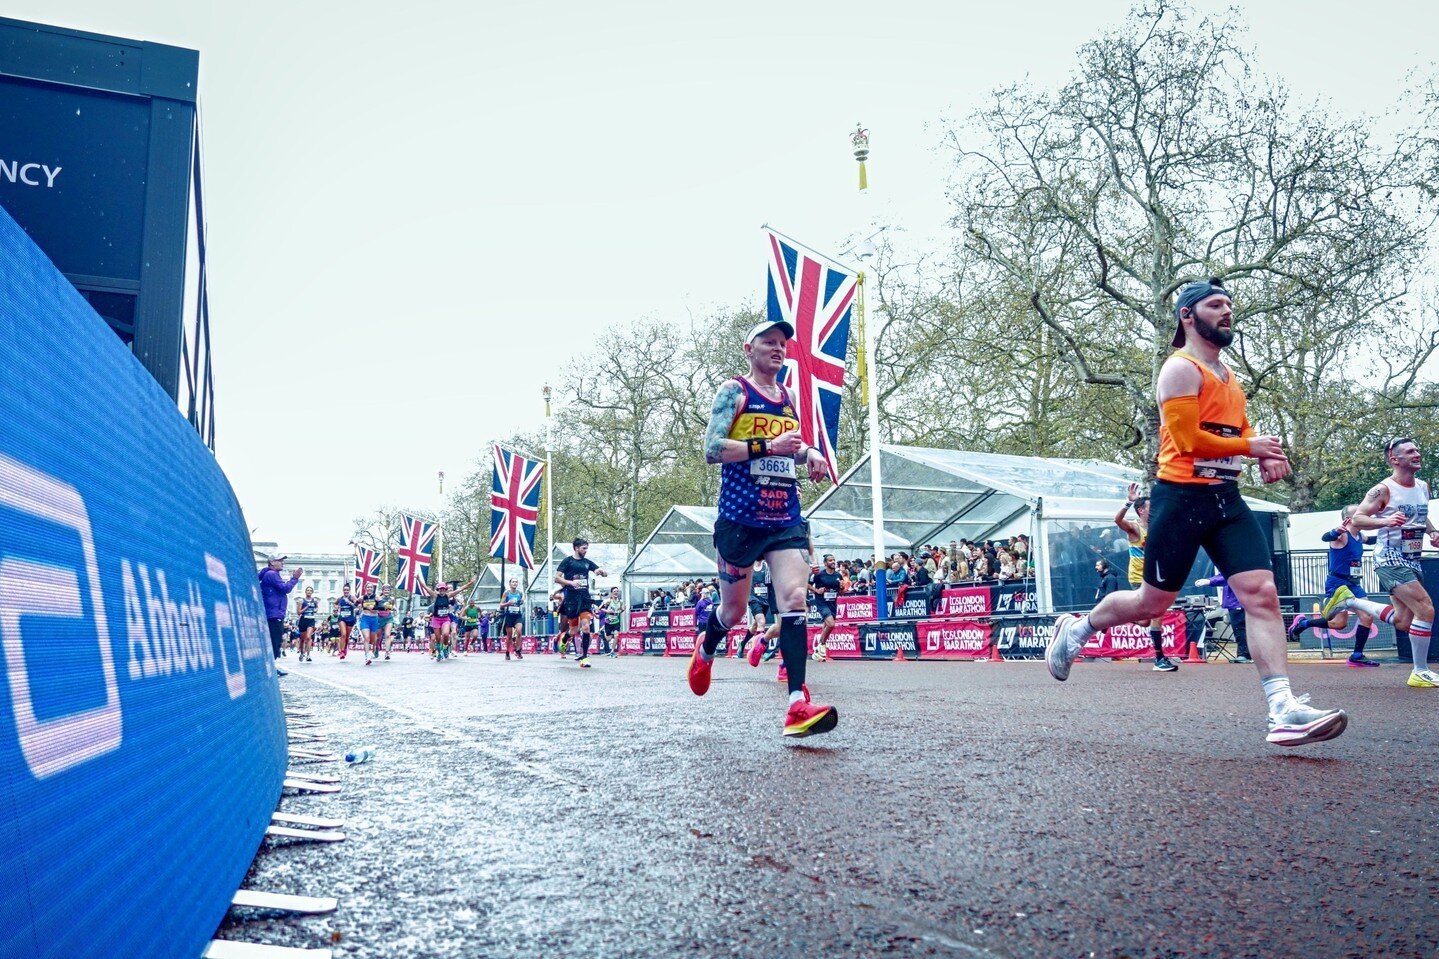 Congratulations to Rob for achieving a personal best at the London Marathon with a time of 3:26:04! Your passion and determination for running is truly inspiring. We applaud you for showing us that with hard work and a positive attitude, anything is 